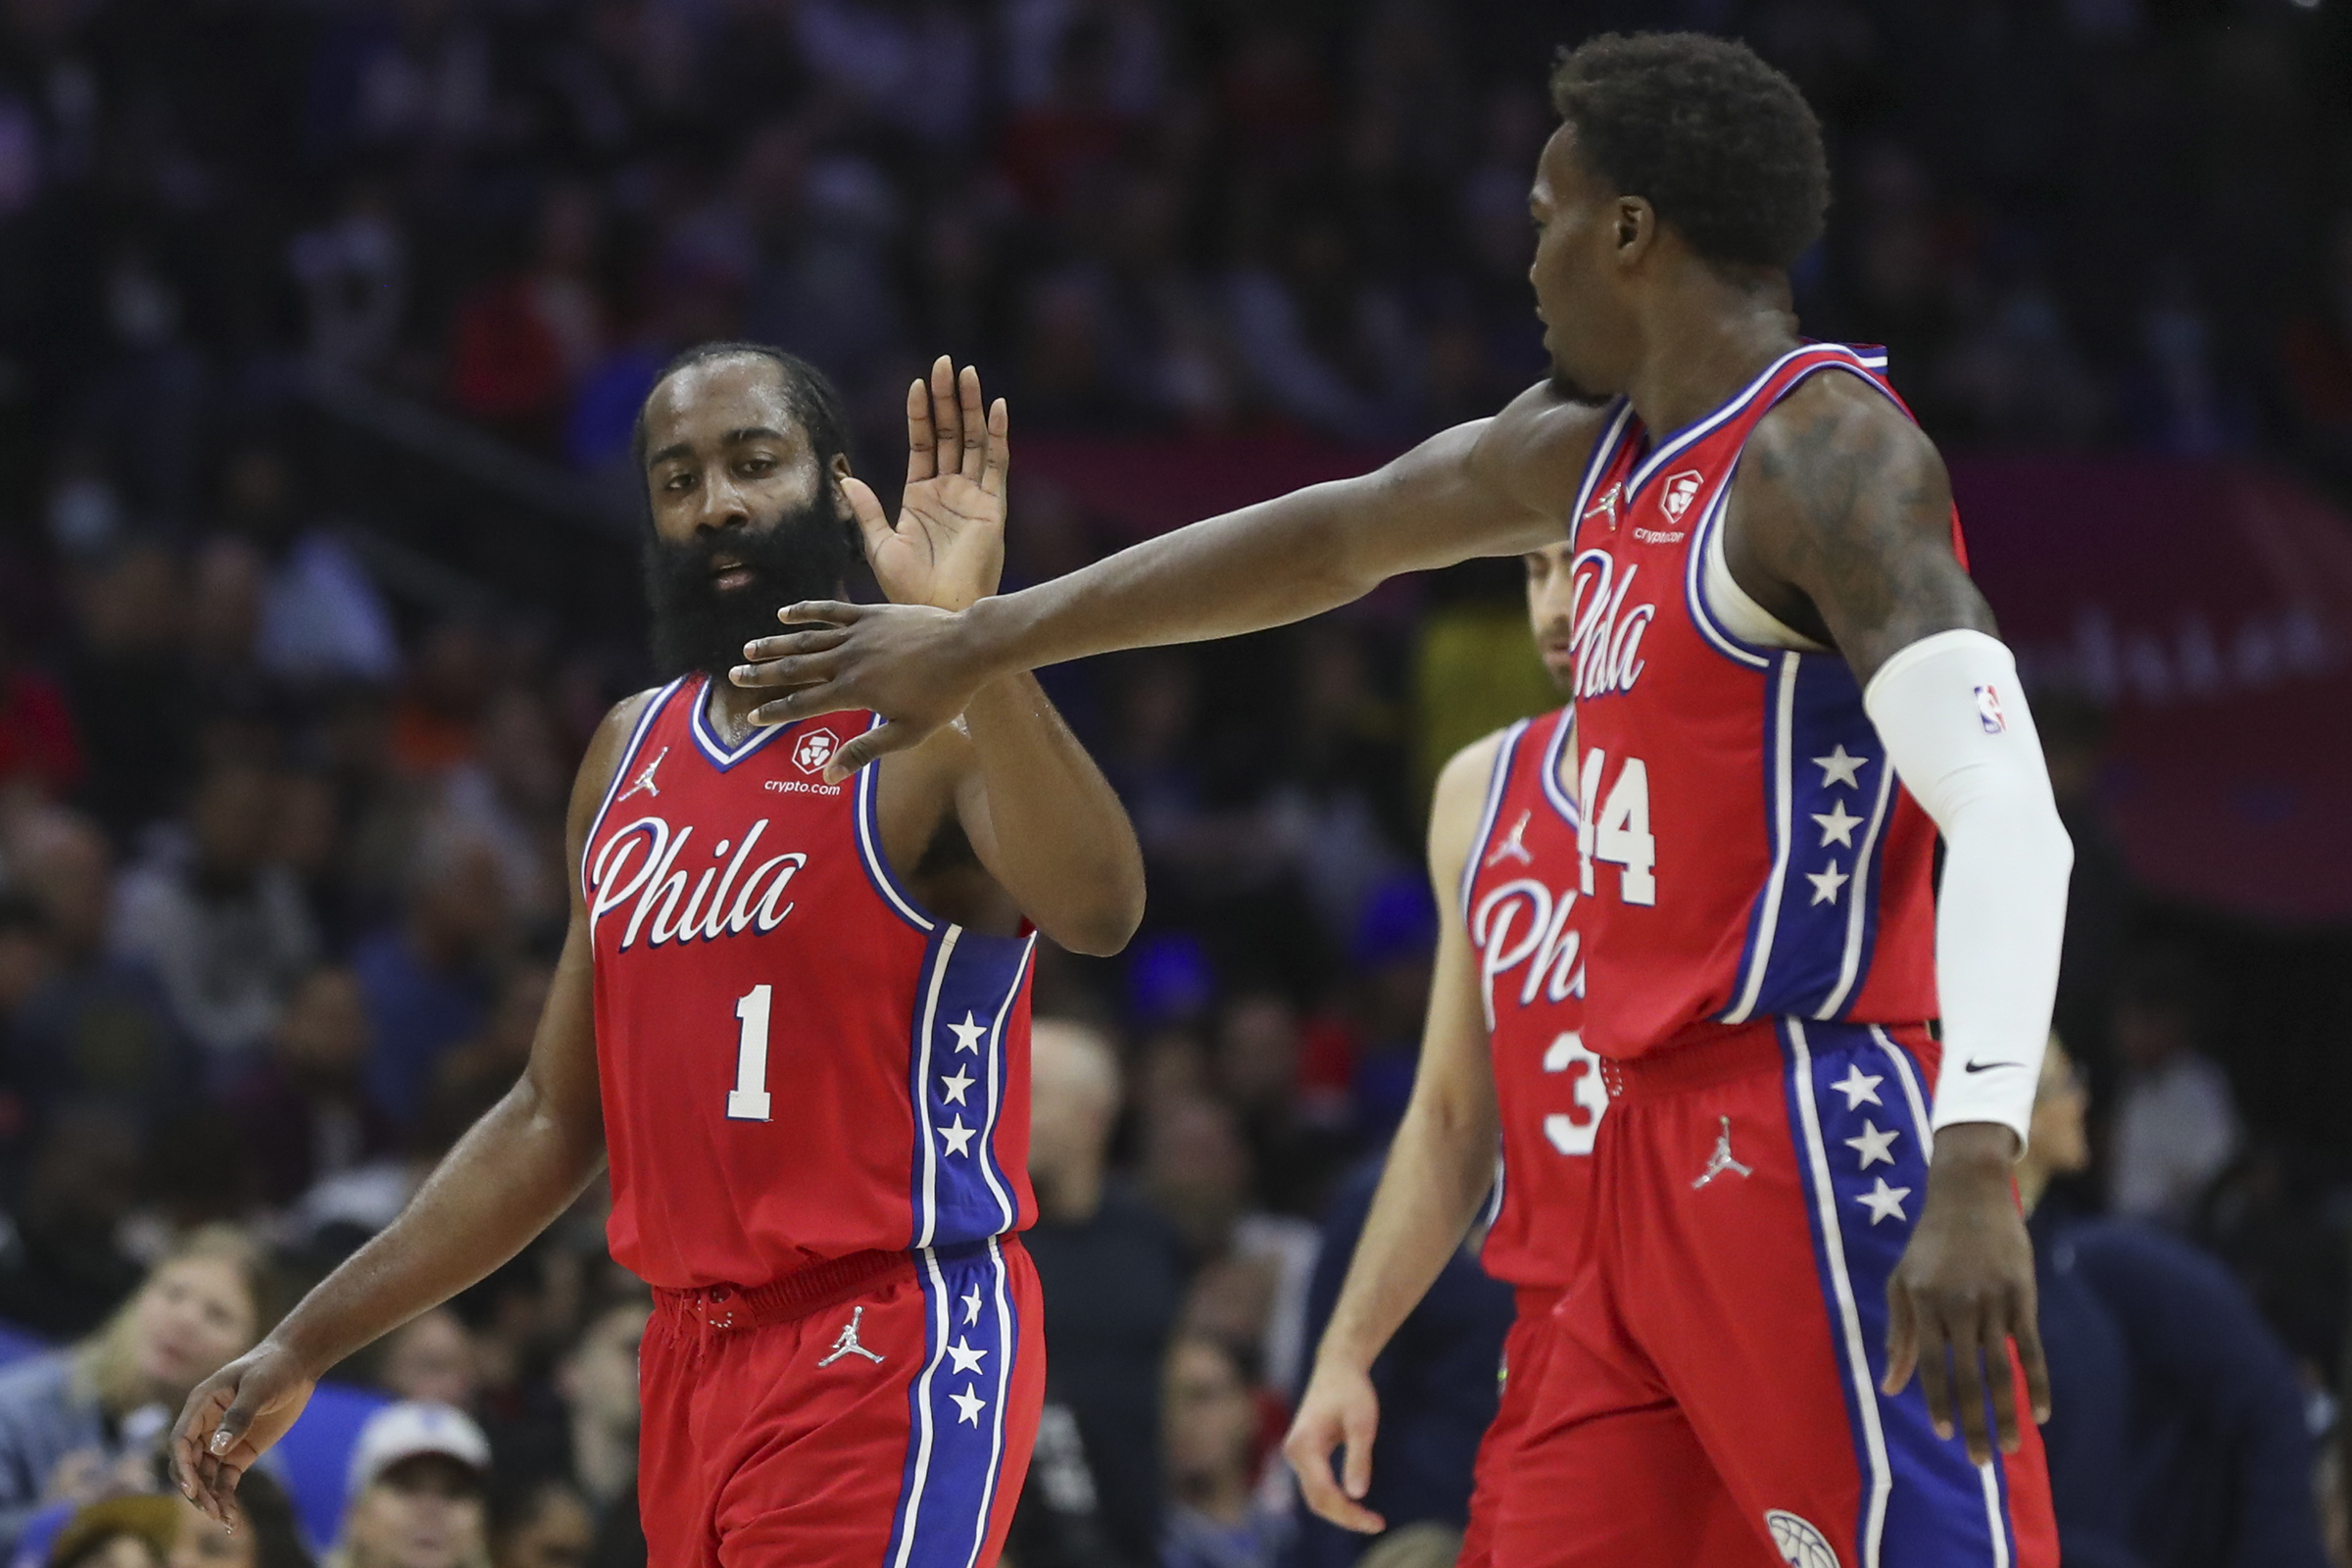 Paul Reed sees offensive chemistry growing with James Harden for Sixers